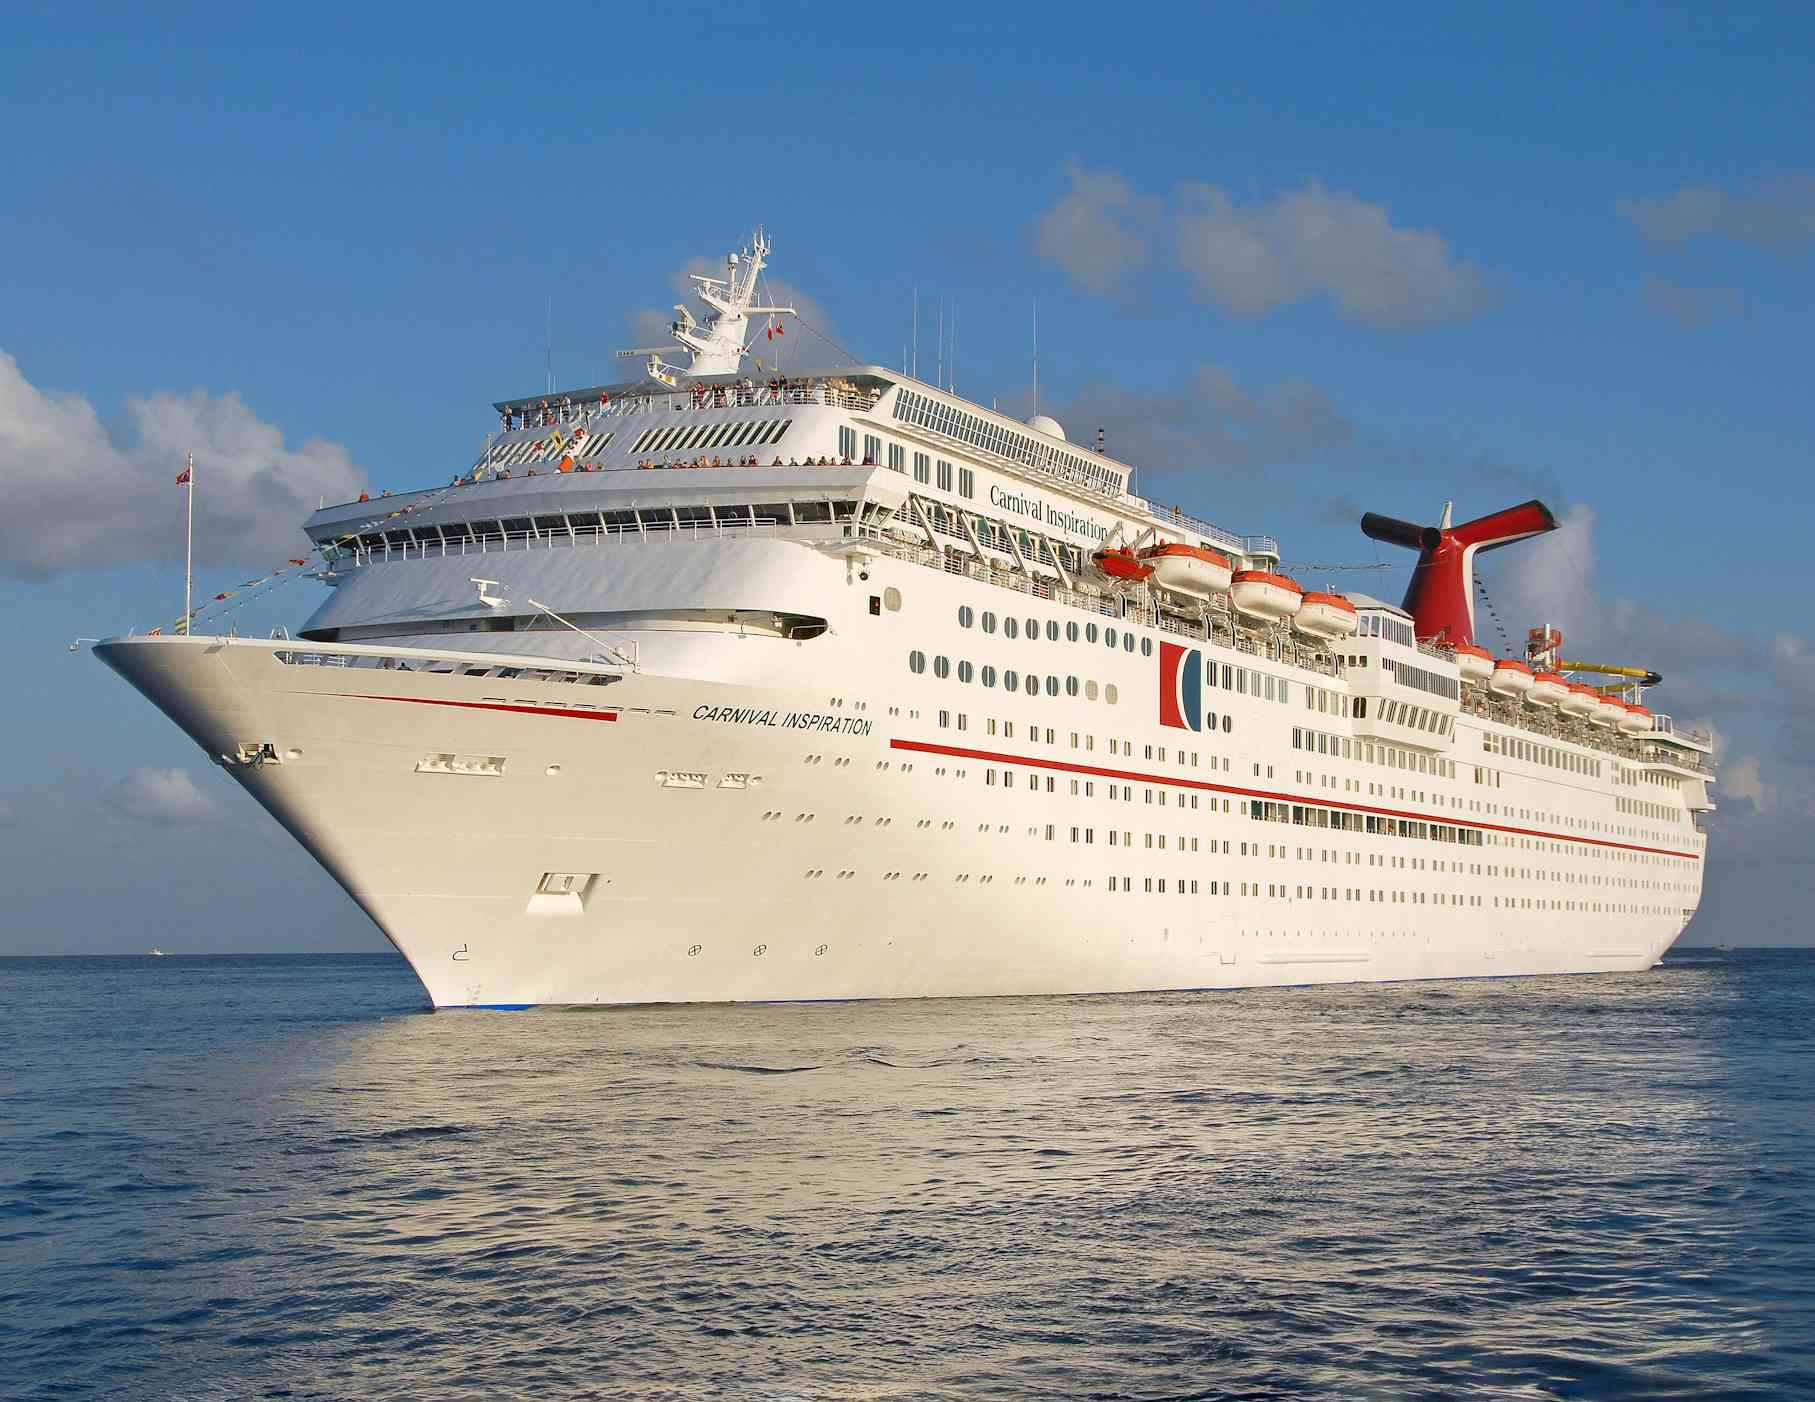 Reservations open for new Carnival cruise leaving Long Beach, California